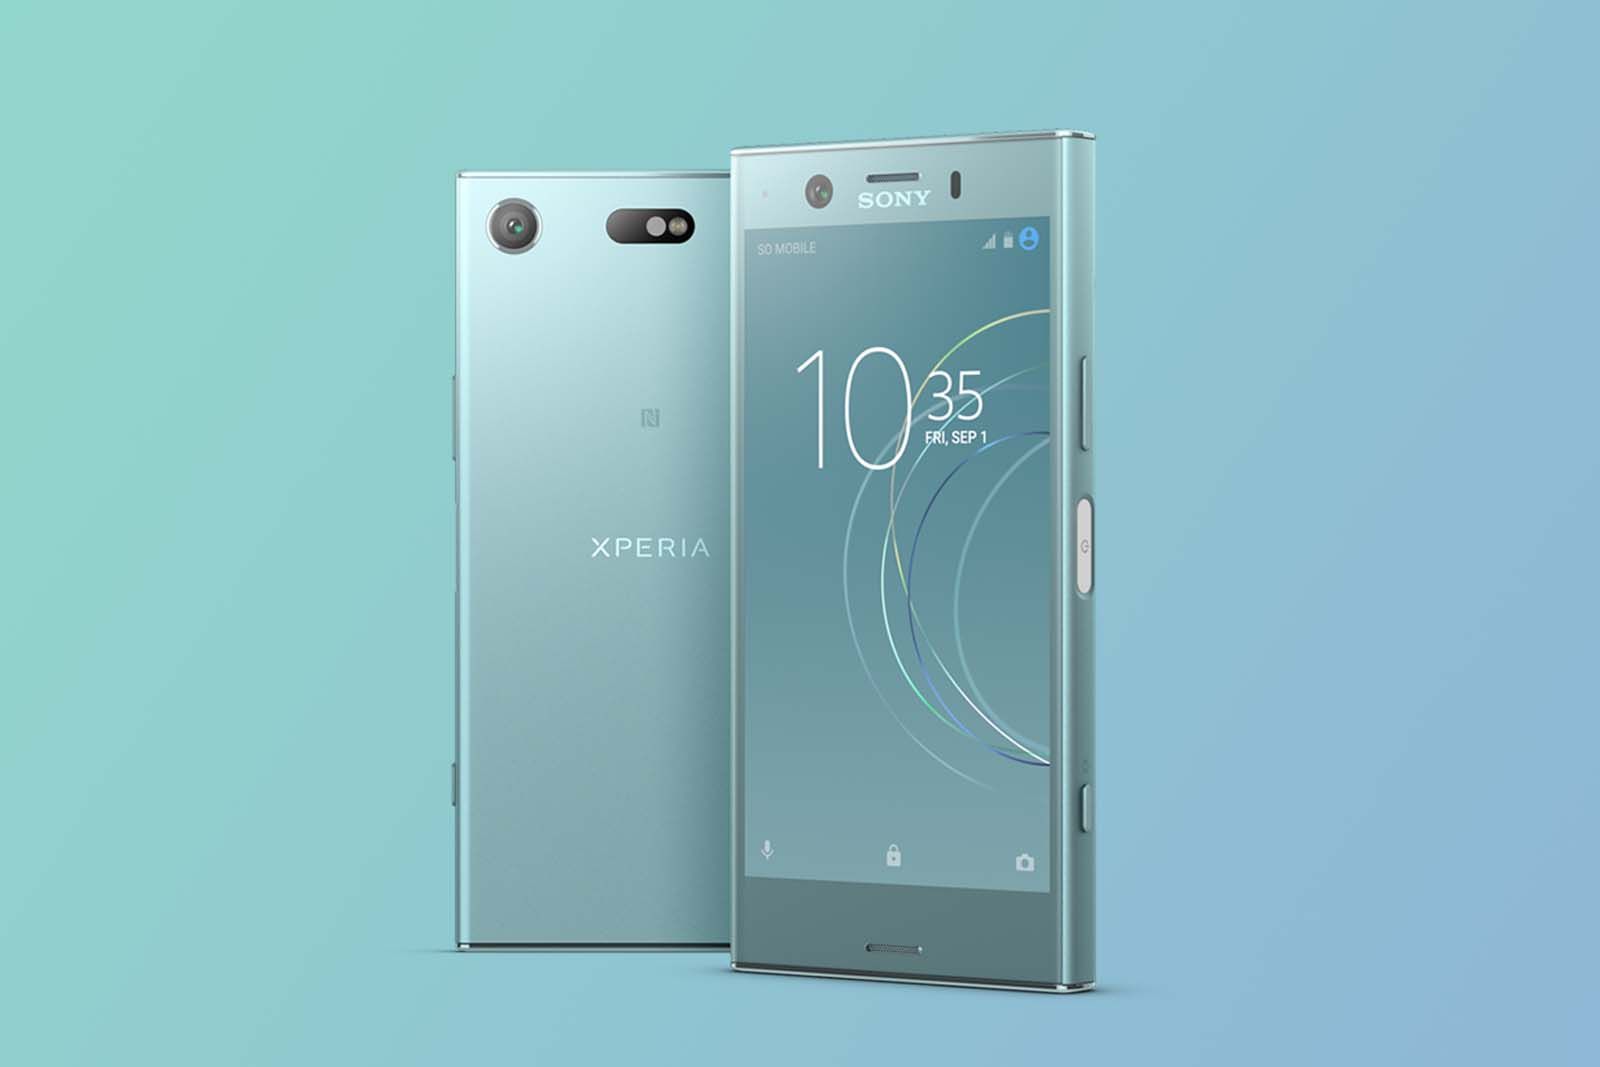 Sony Xperia Xz1 And Xz1 Compact Release Date Specs And Everything You Need To Know image 3